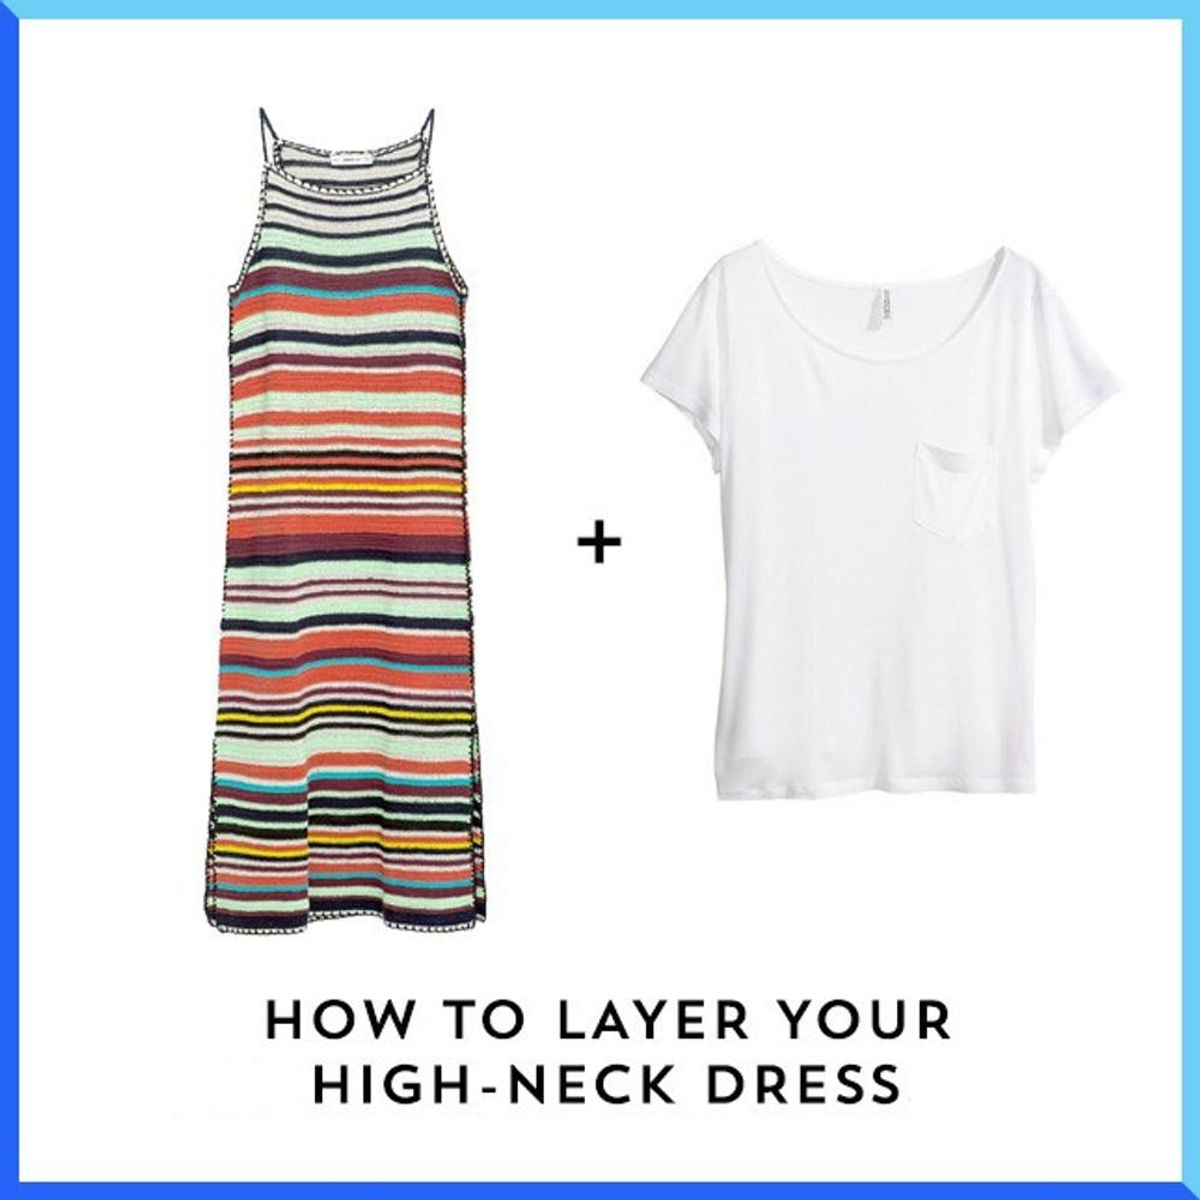 Need-to-Know Layering Hacks for Every Kind of Spring Dress